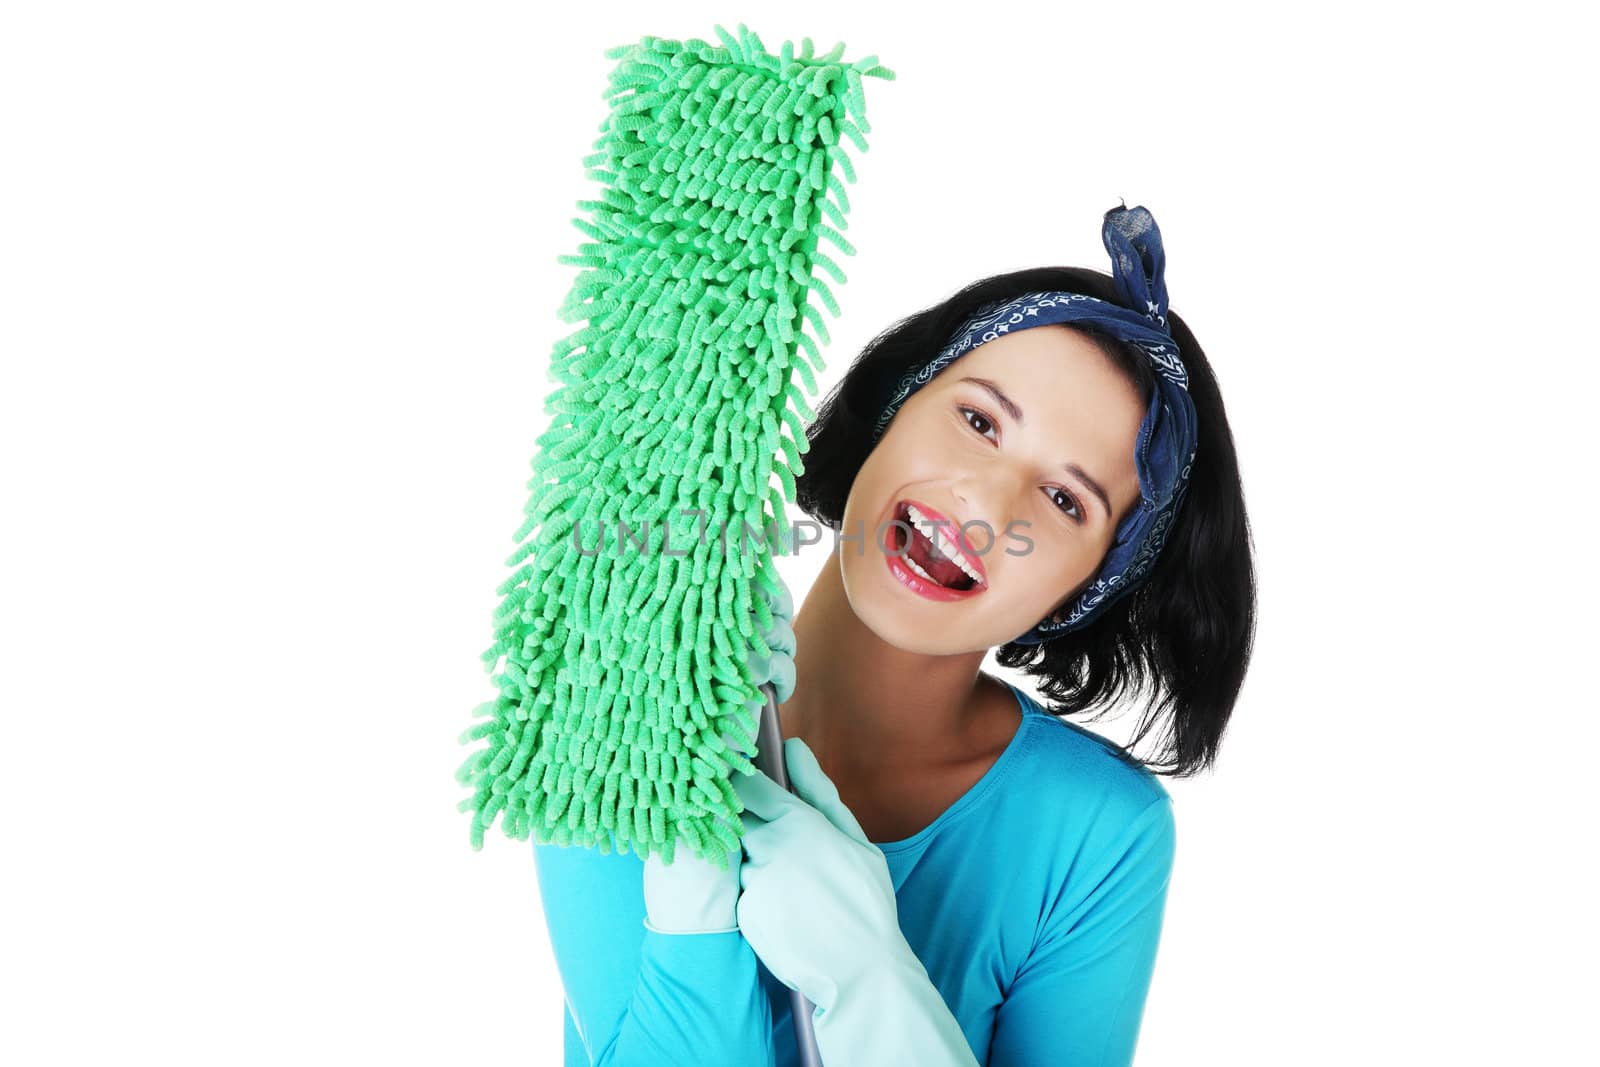 Happy cleaning woman portrait, isolated on white